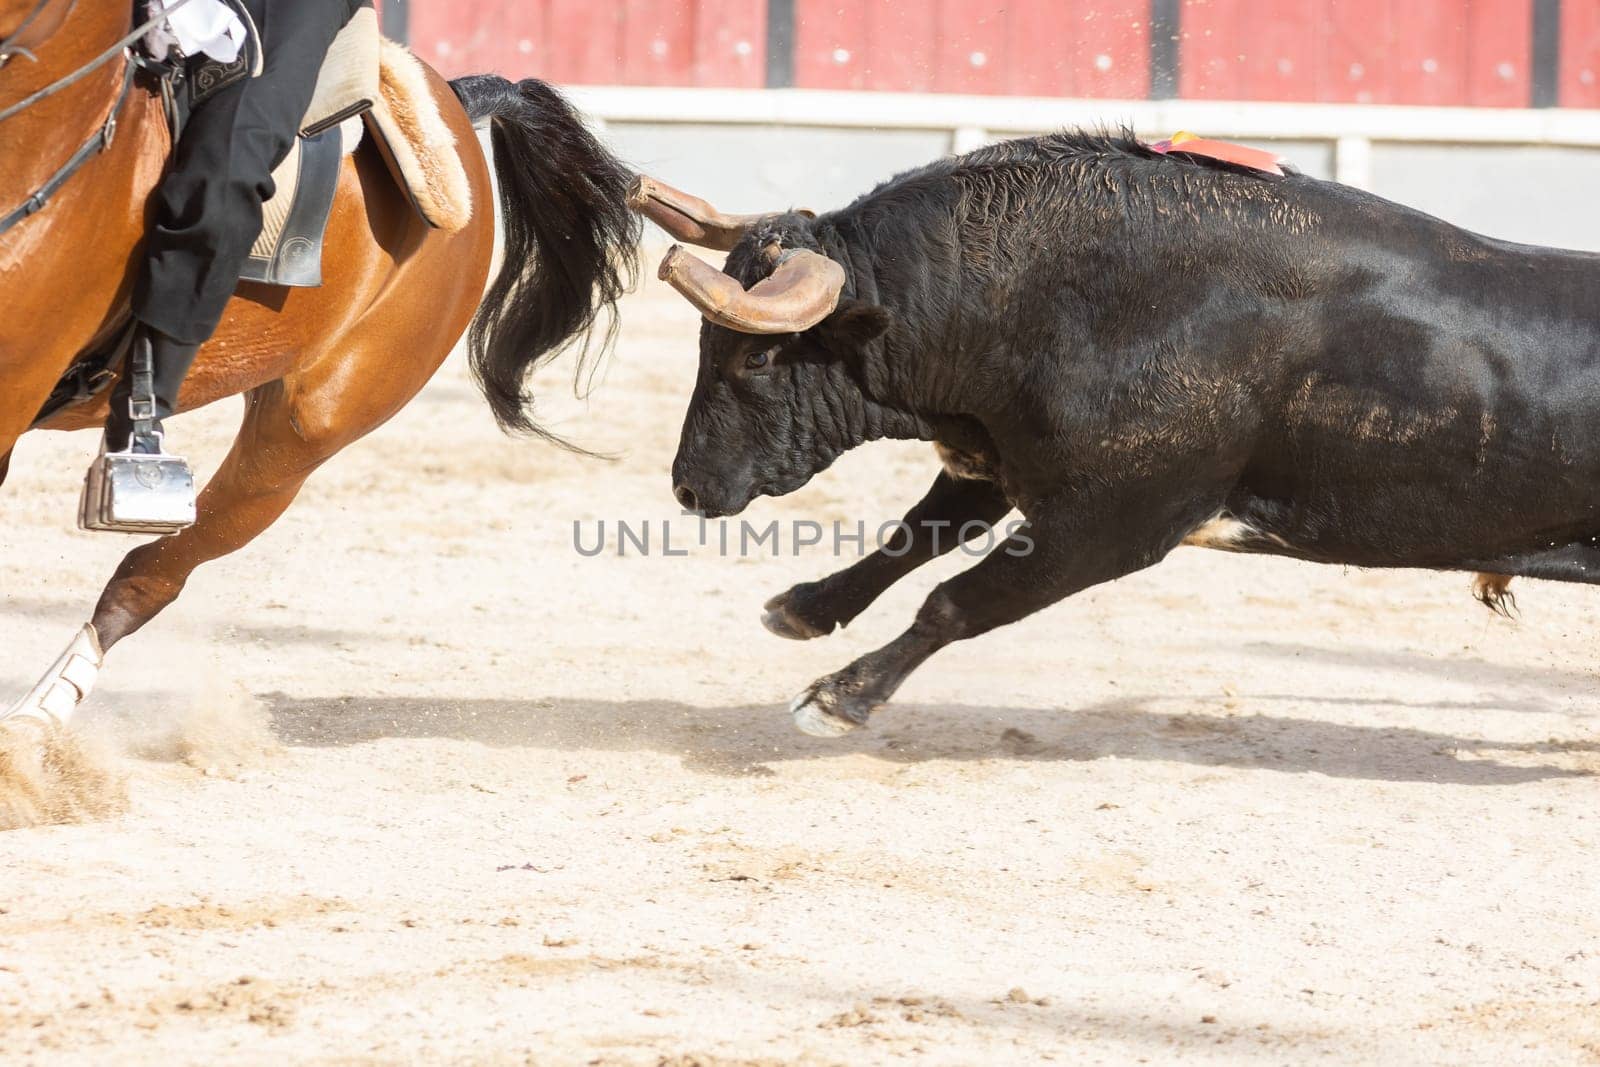 March 26, 2023 Lisbon, Portugal: Tourada - a bull chasing a rider on a horse in the arena by Studia72